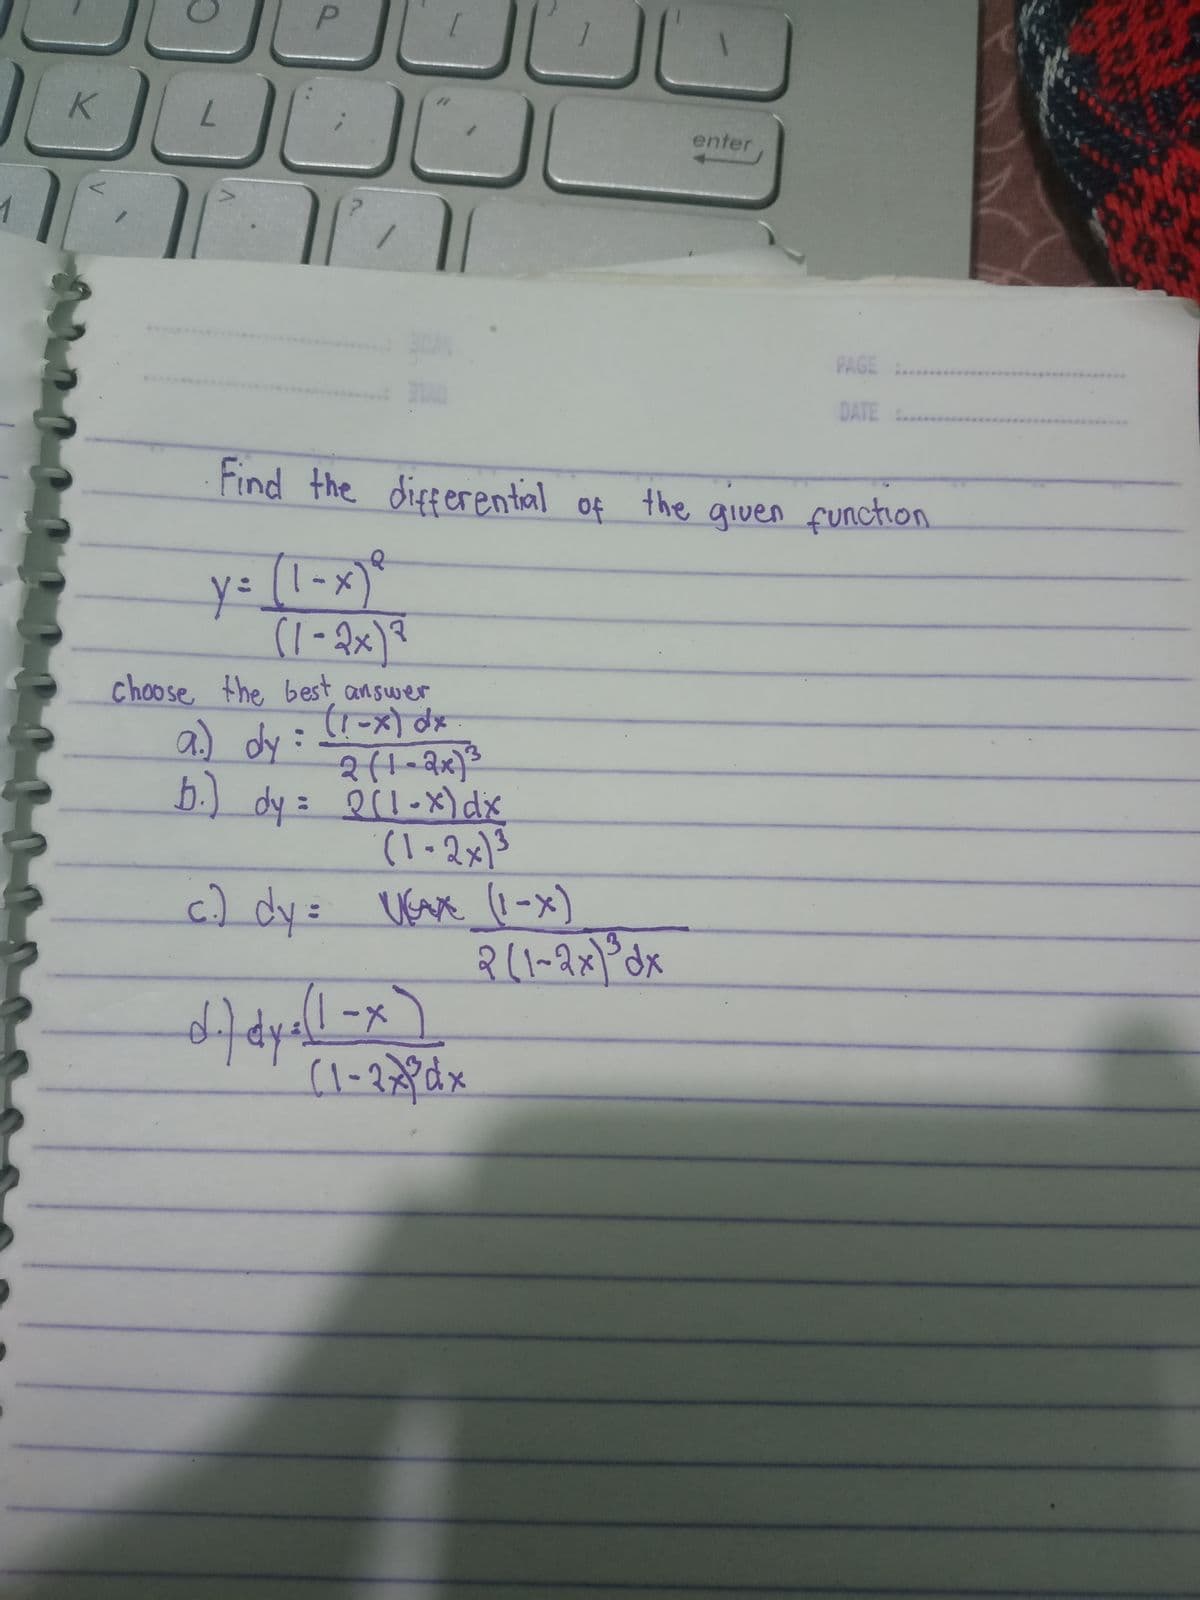 7.
enter
PAGE:
DATE
Find the differential of the given function
y= (1-x)*
choose the best answer
a) dy:
b.
) dy = eil-x) dis
(1-2x)3
c) dys UsAe (-x)
R(1-2x)°dx
P.
